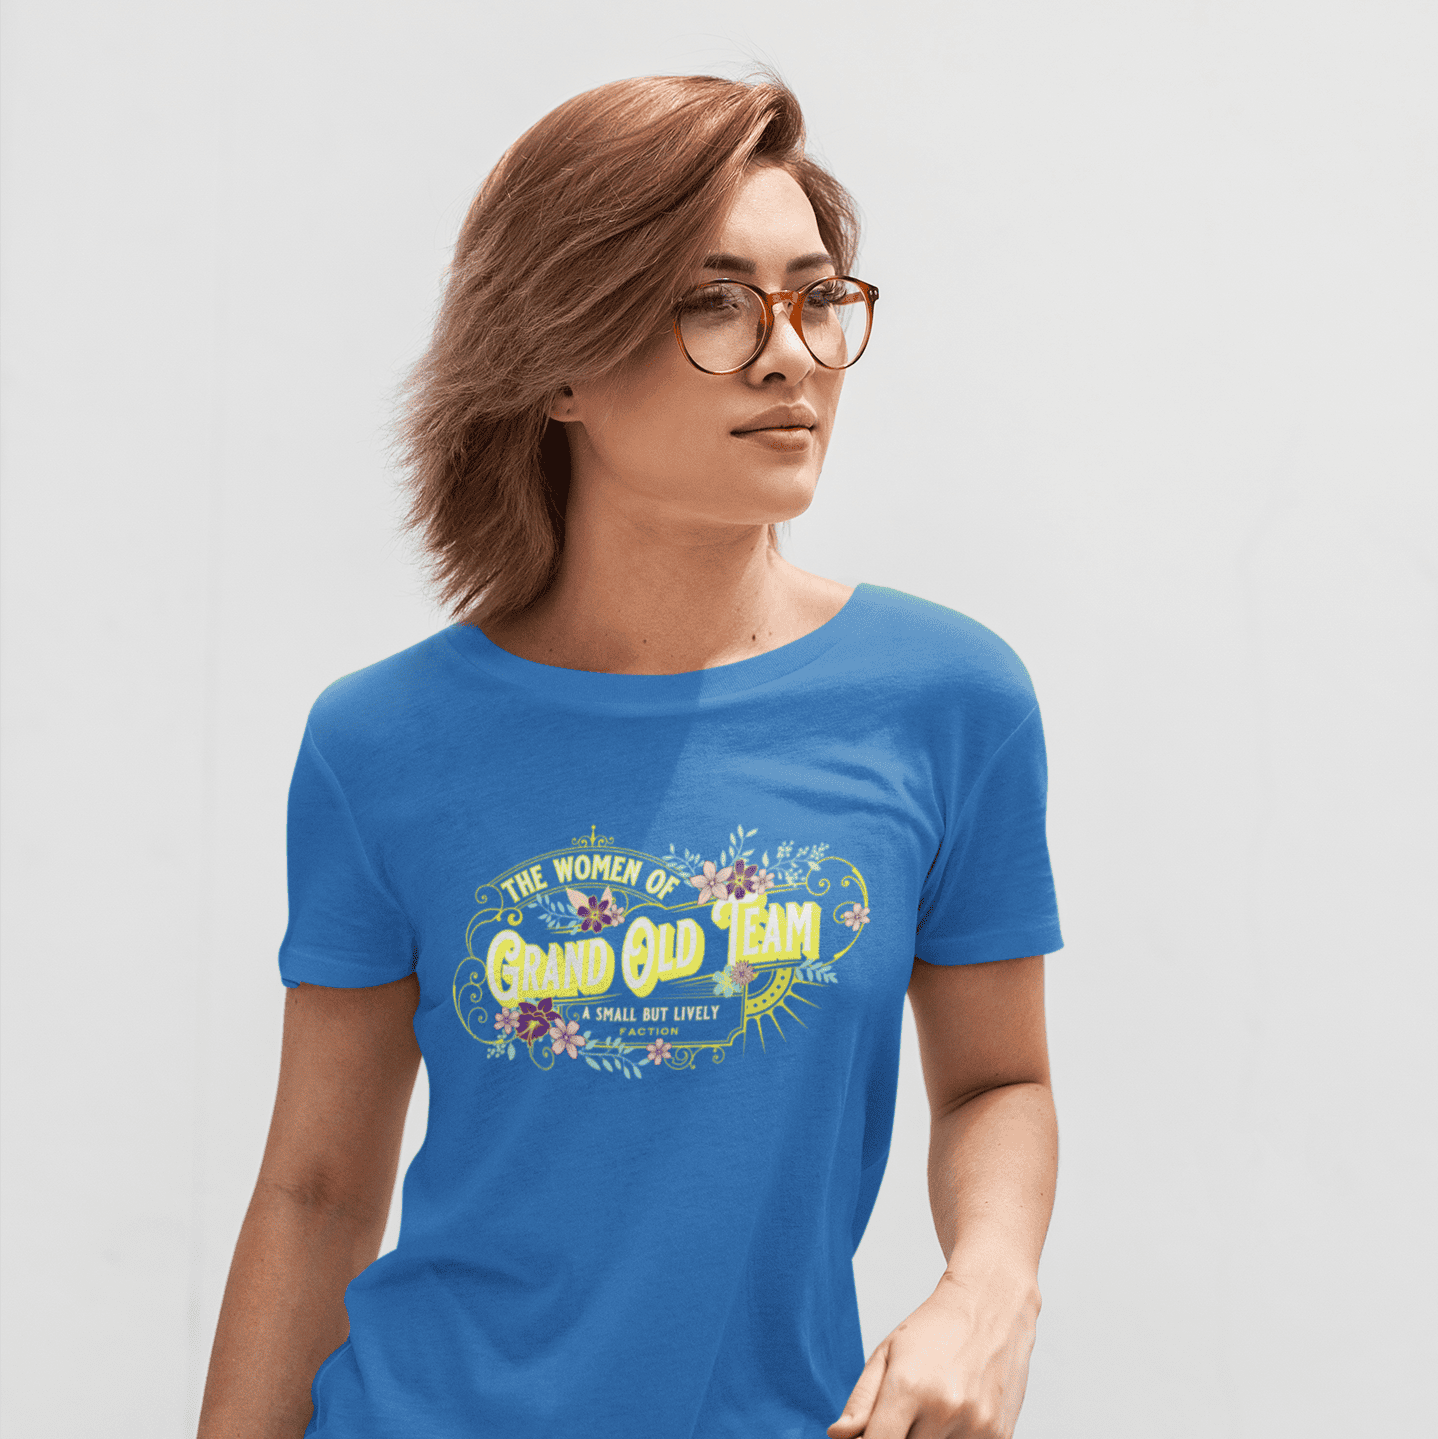 women-got-t-shirt-mockup-featuring-a-short-haired-woman-posing-in-front-of-a-white-wall-square.png